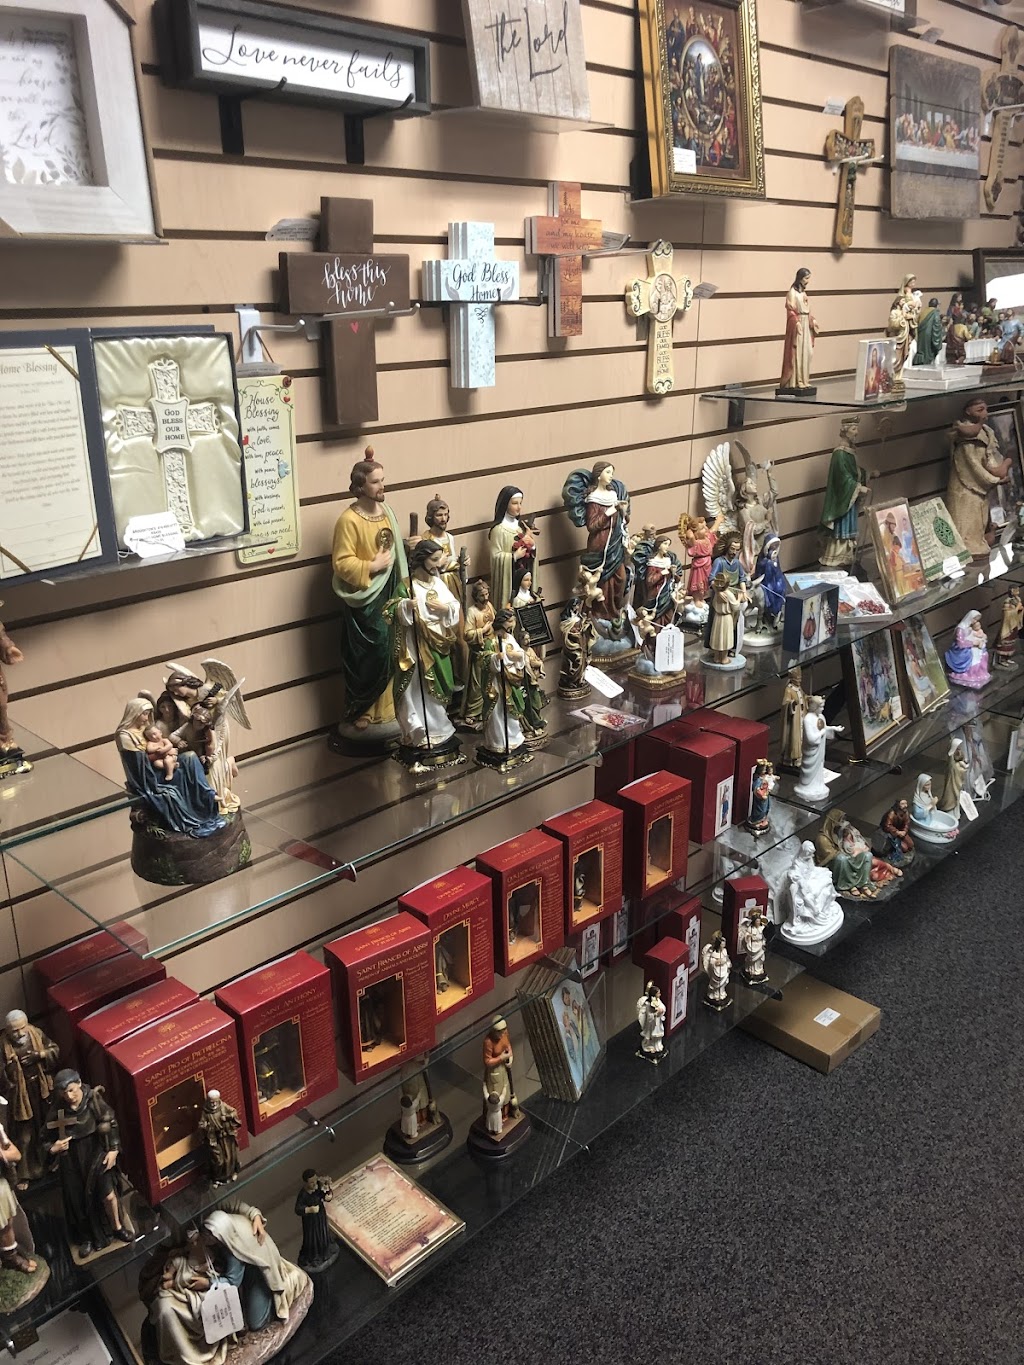 Broughtons Church Supplies, Religious Books & Gifts | book store | 322 Consumers Rd, North York, ON M2J 1P8, Canada | 4166904777 OR +1 416-690-4777